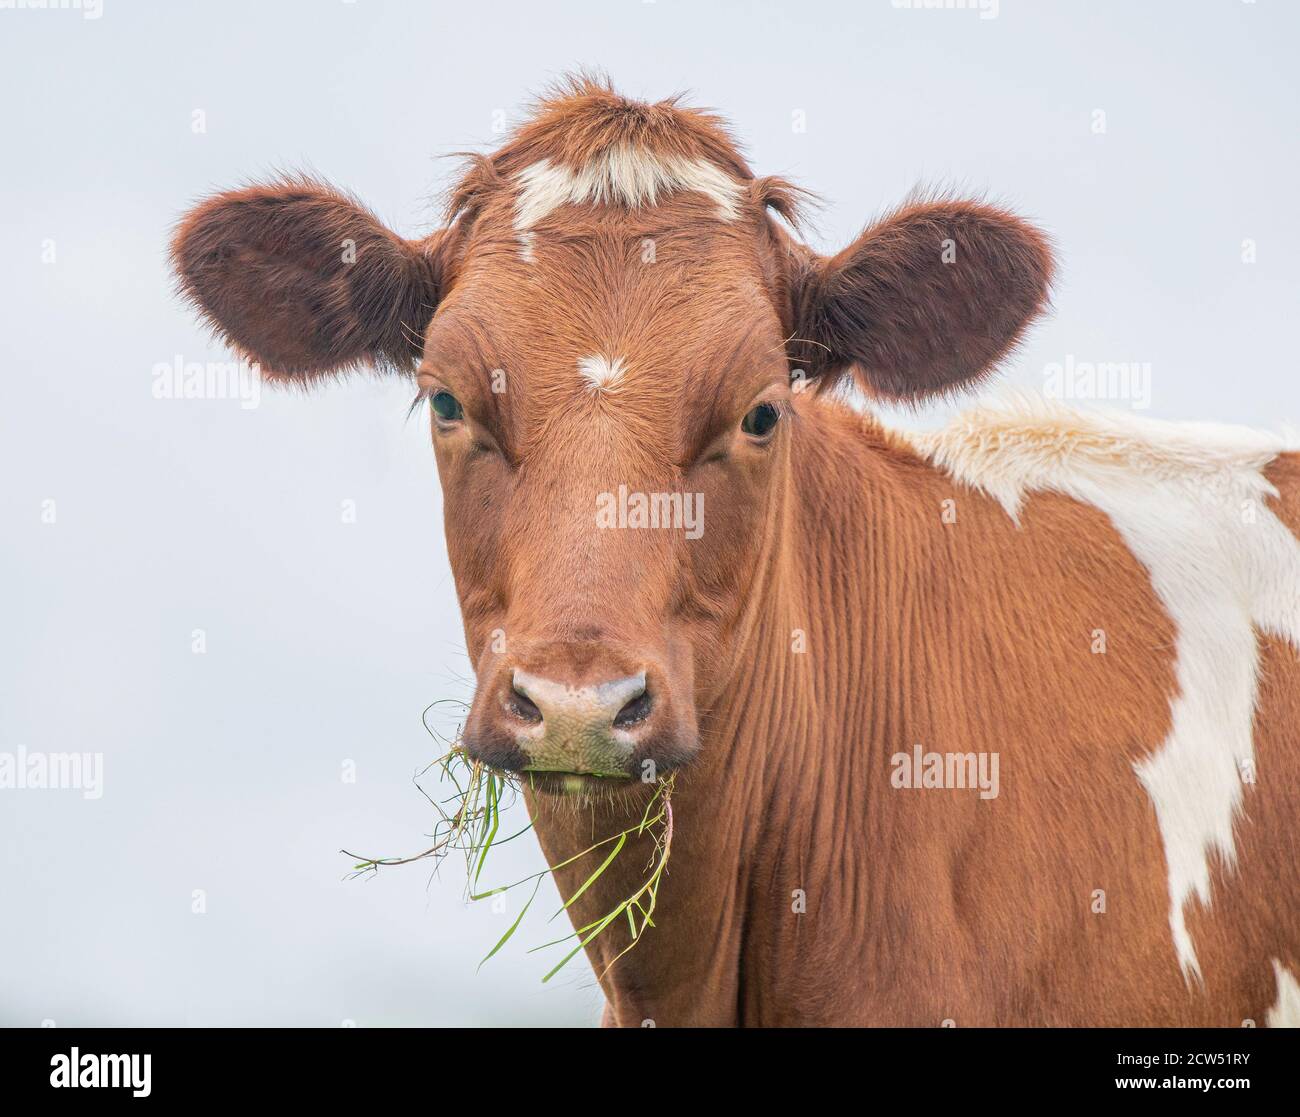 A Brown and white cow on a white background Stock Photo